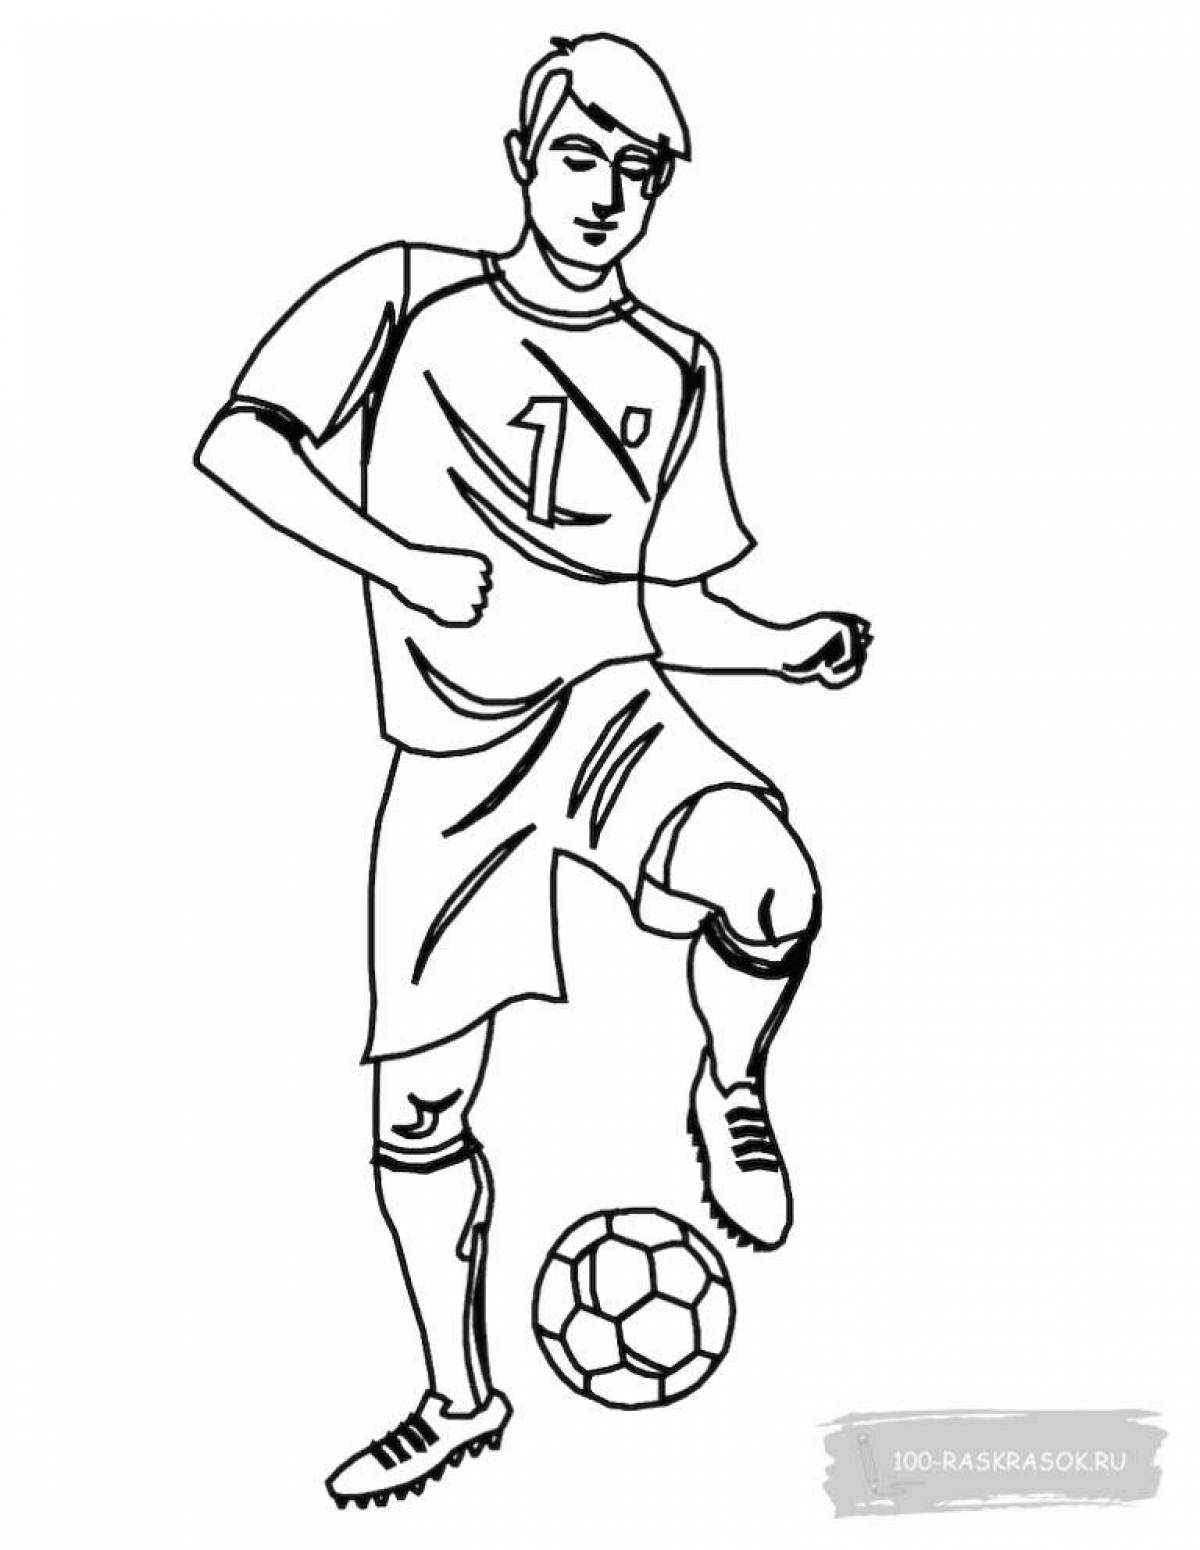 Live coloring of a football player for children